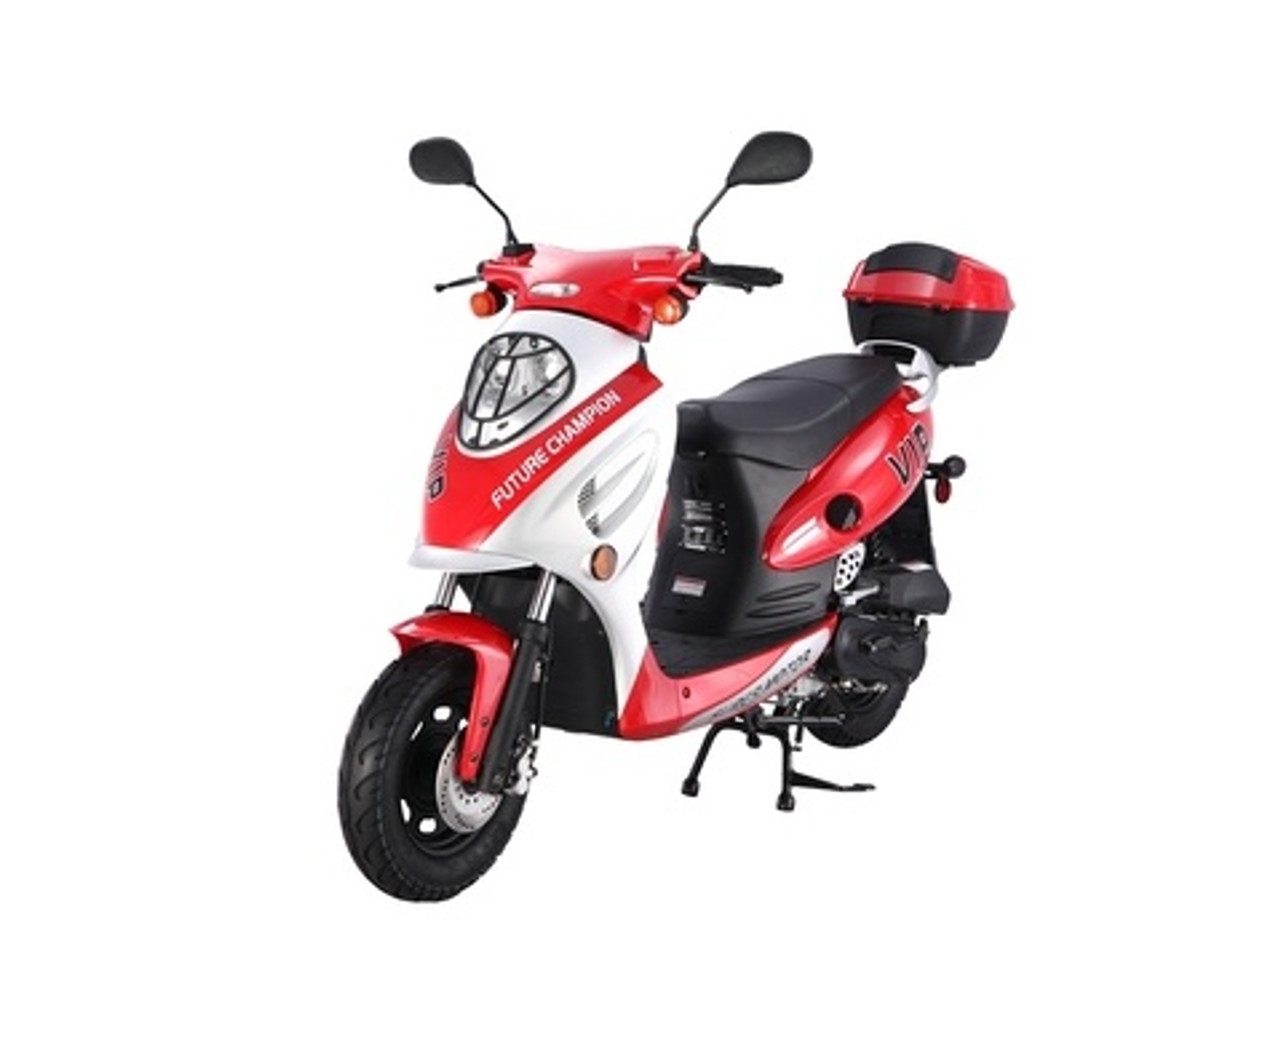 TAO 49cc / 50cc street legal fully automatic scooter moped with a Matching  trunk - Choose your color, Black Blue Red Green and Pink